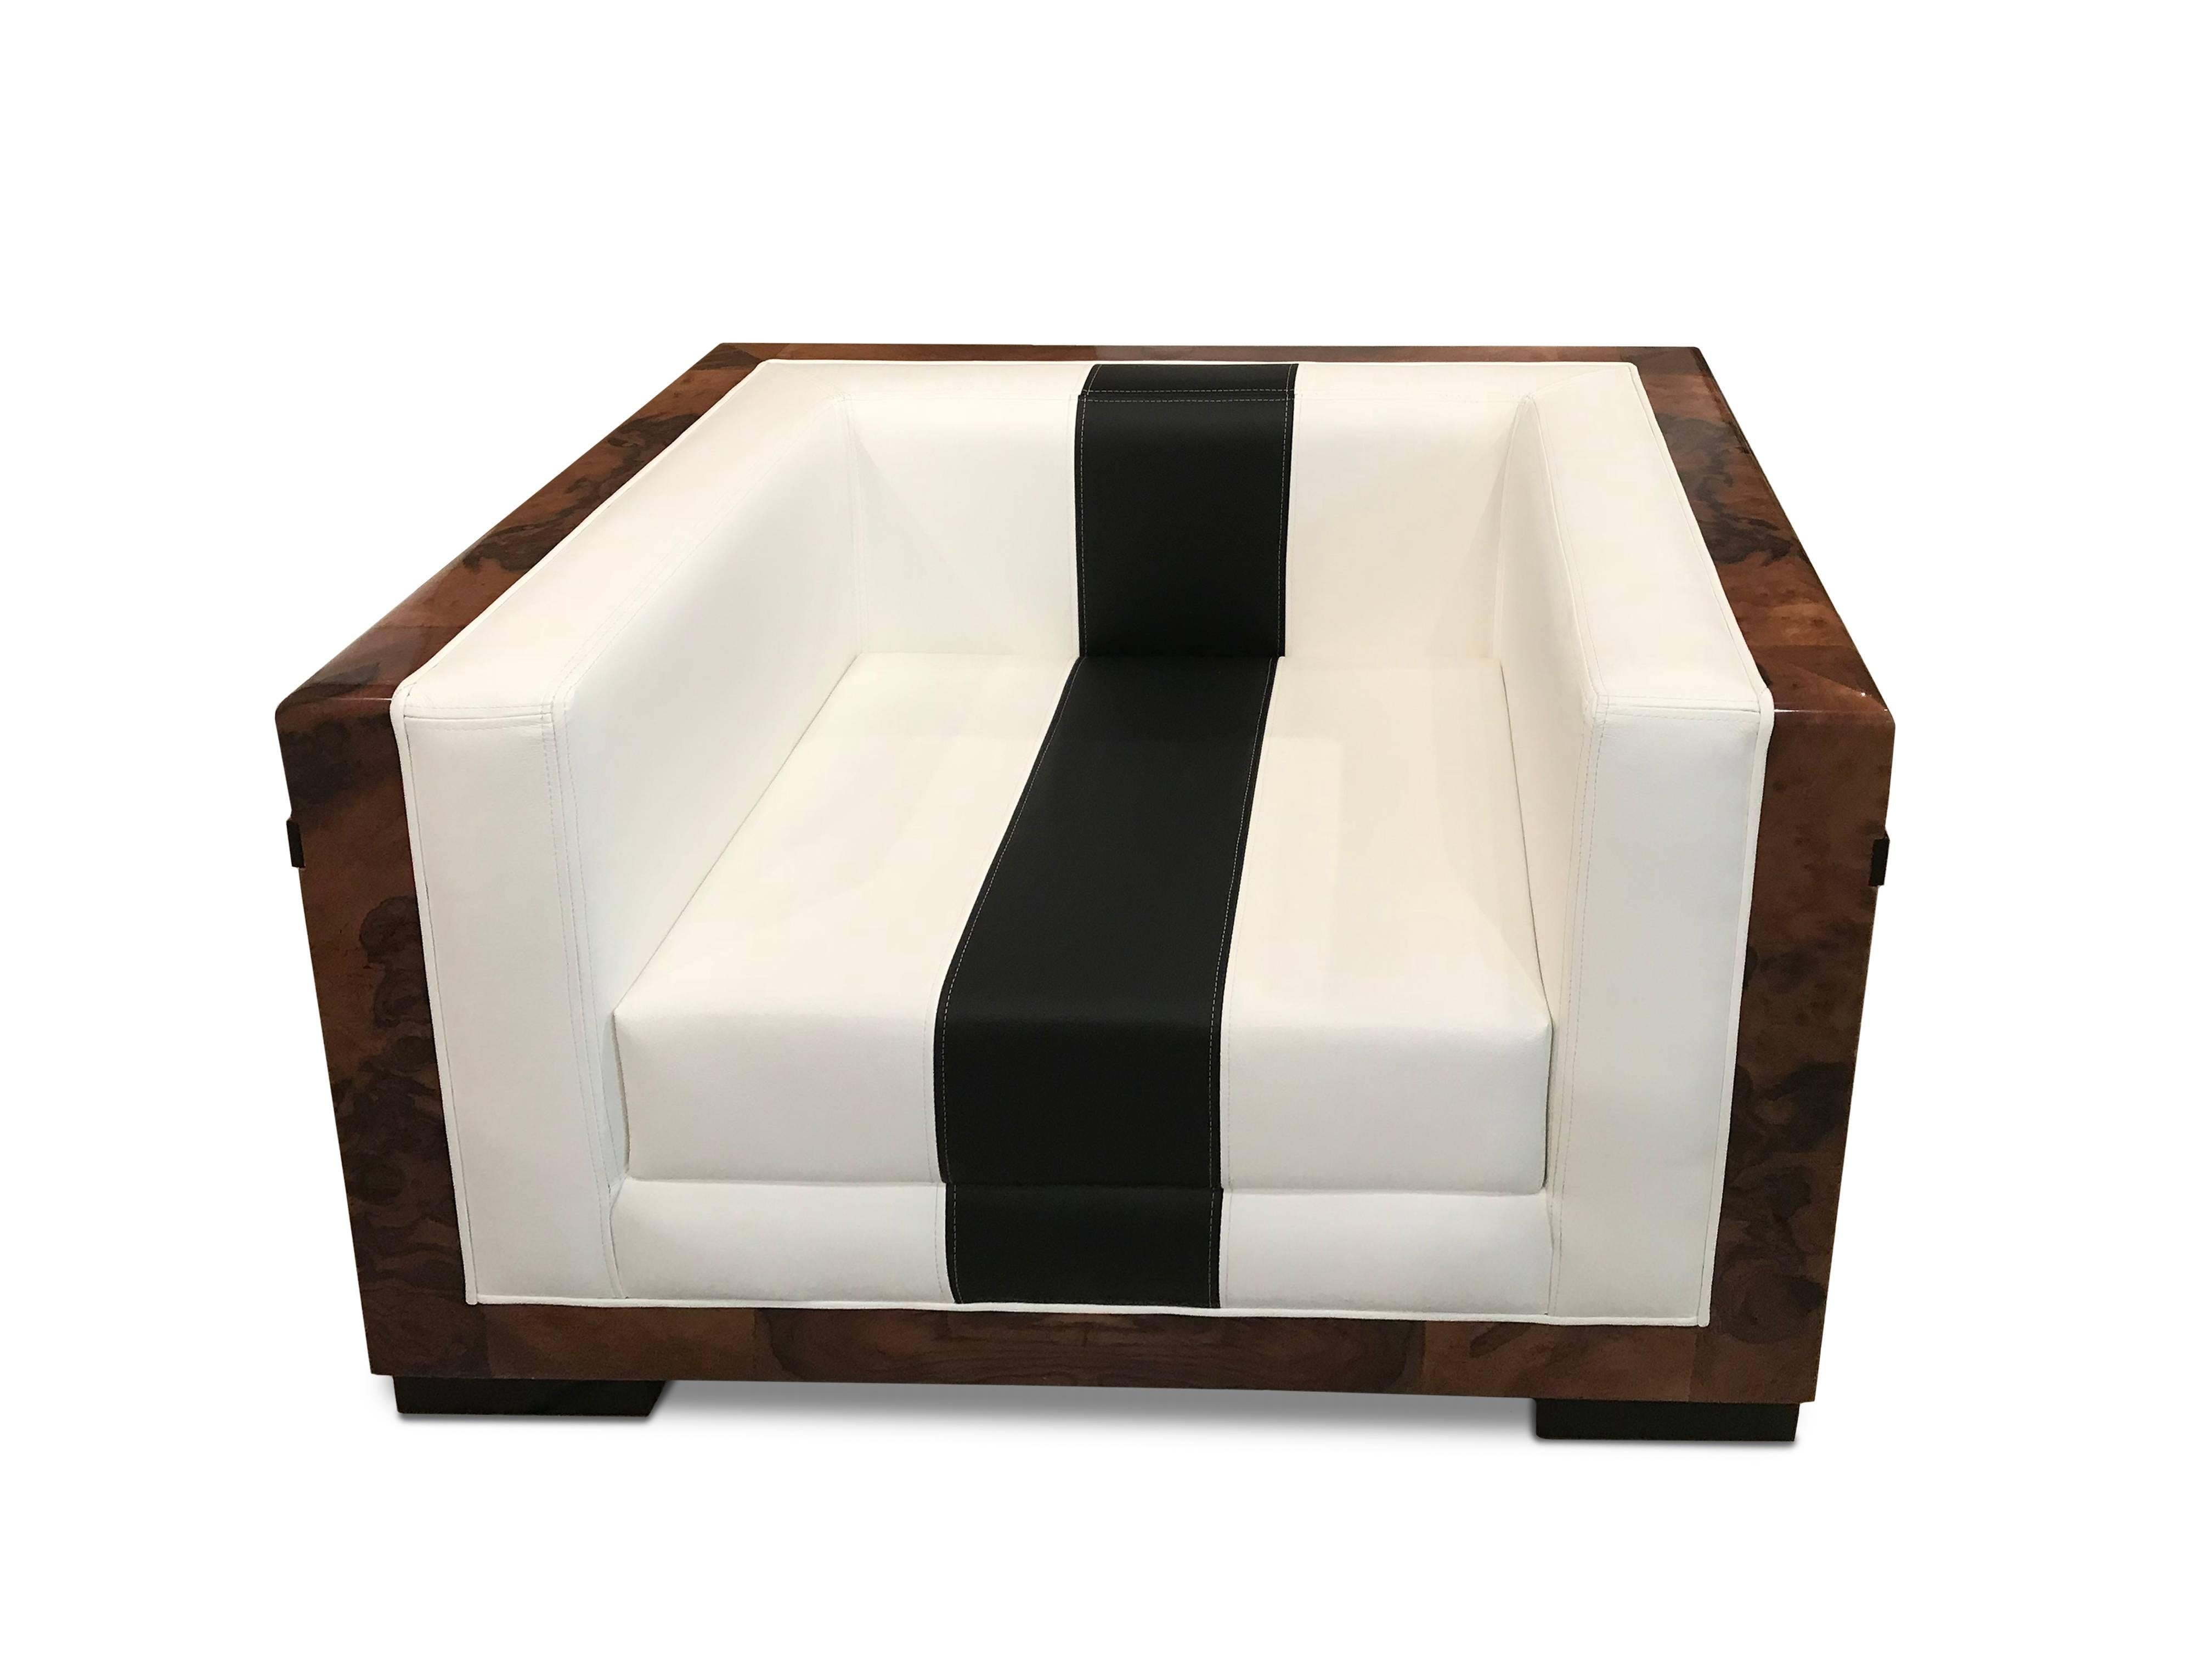 Solid armchair with walnut veneer finished in a high gloss varnish accented with black linear insets of ebony. Upholstered in white matte leather with black matte leather inset. Accented with contrasting stitching.